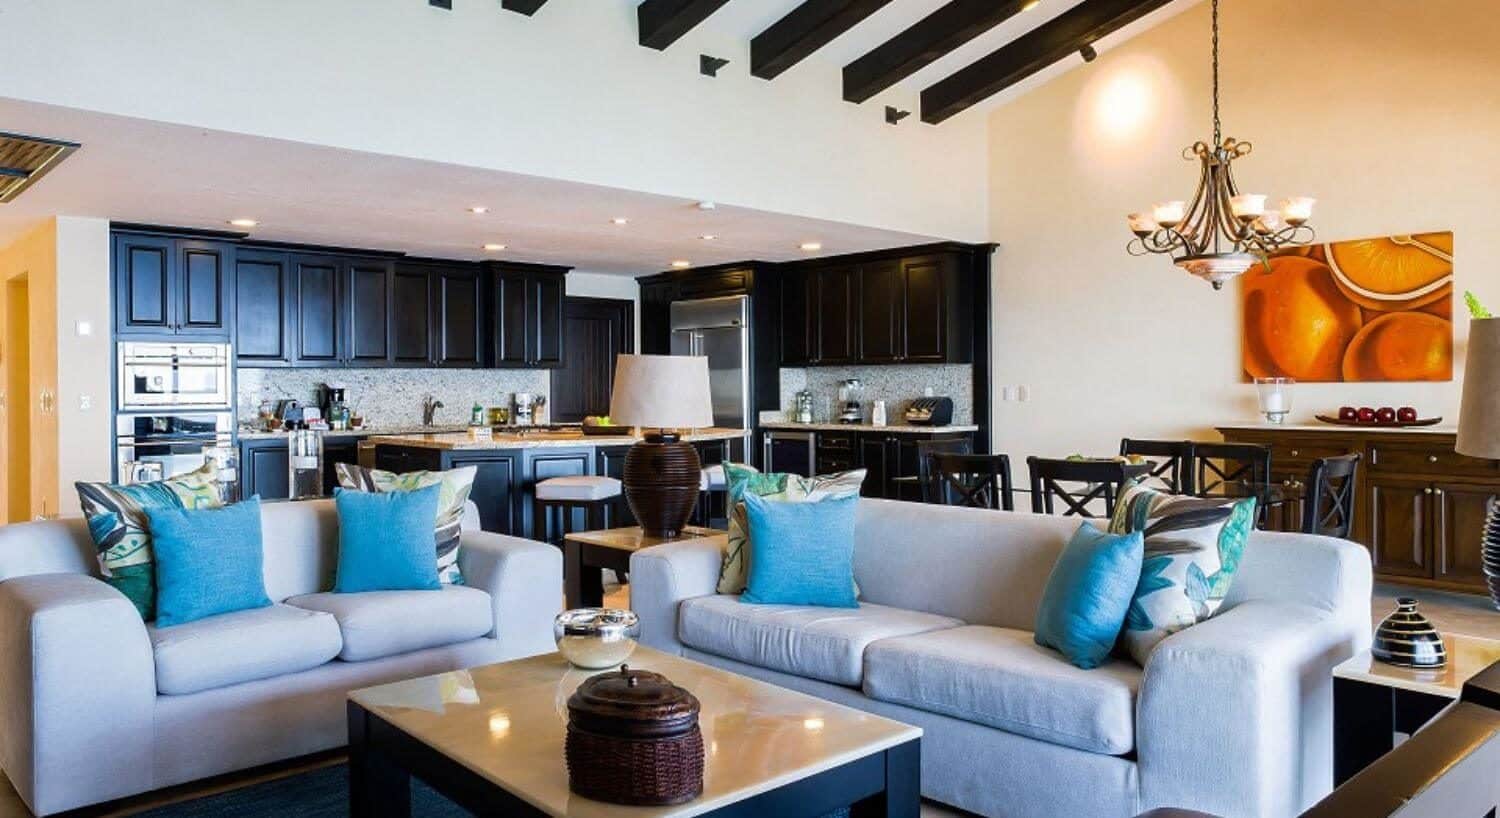 An open floor plan living area with plush white sofas with blue and green throw pillows, a marble coffee table, a dining table and chairs, and a full kitchen.